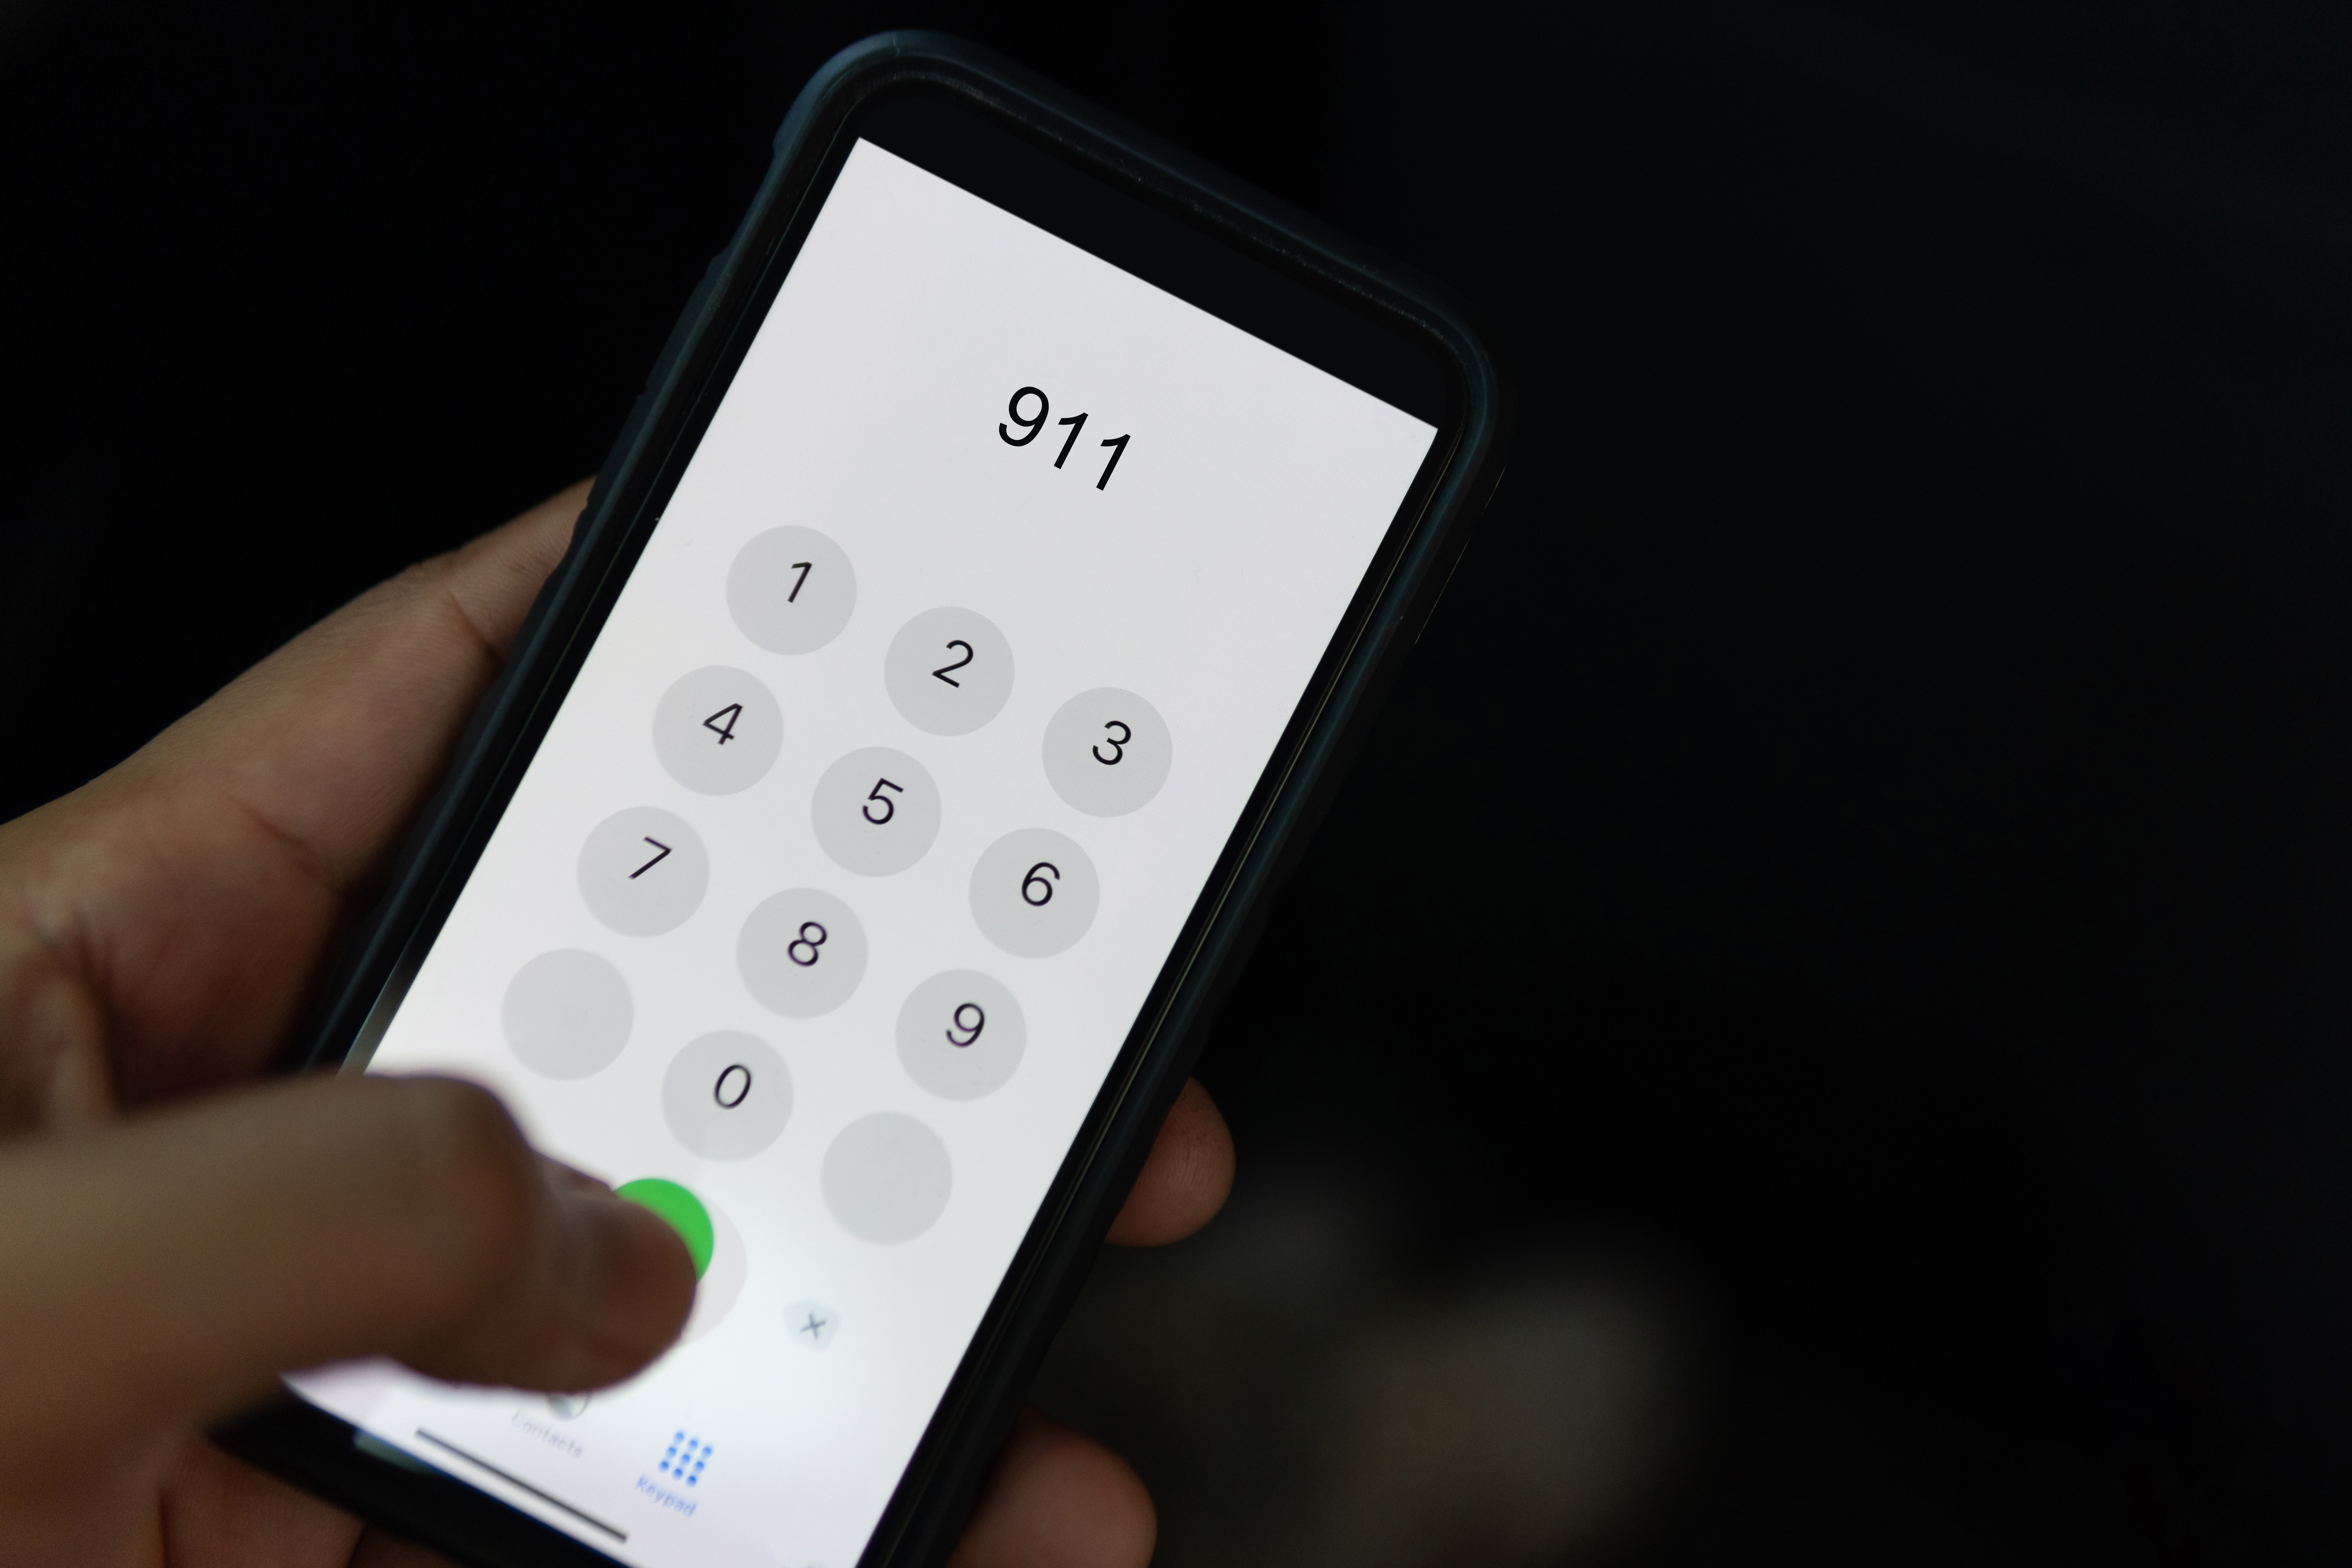 Hand holding cell phone with emergency number 911 on black background. | Source: Shutterstock